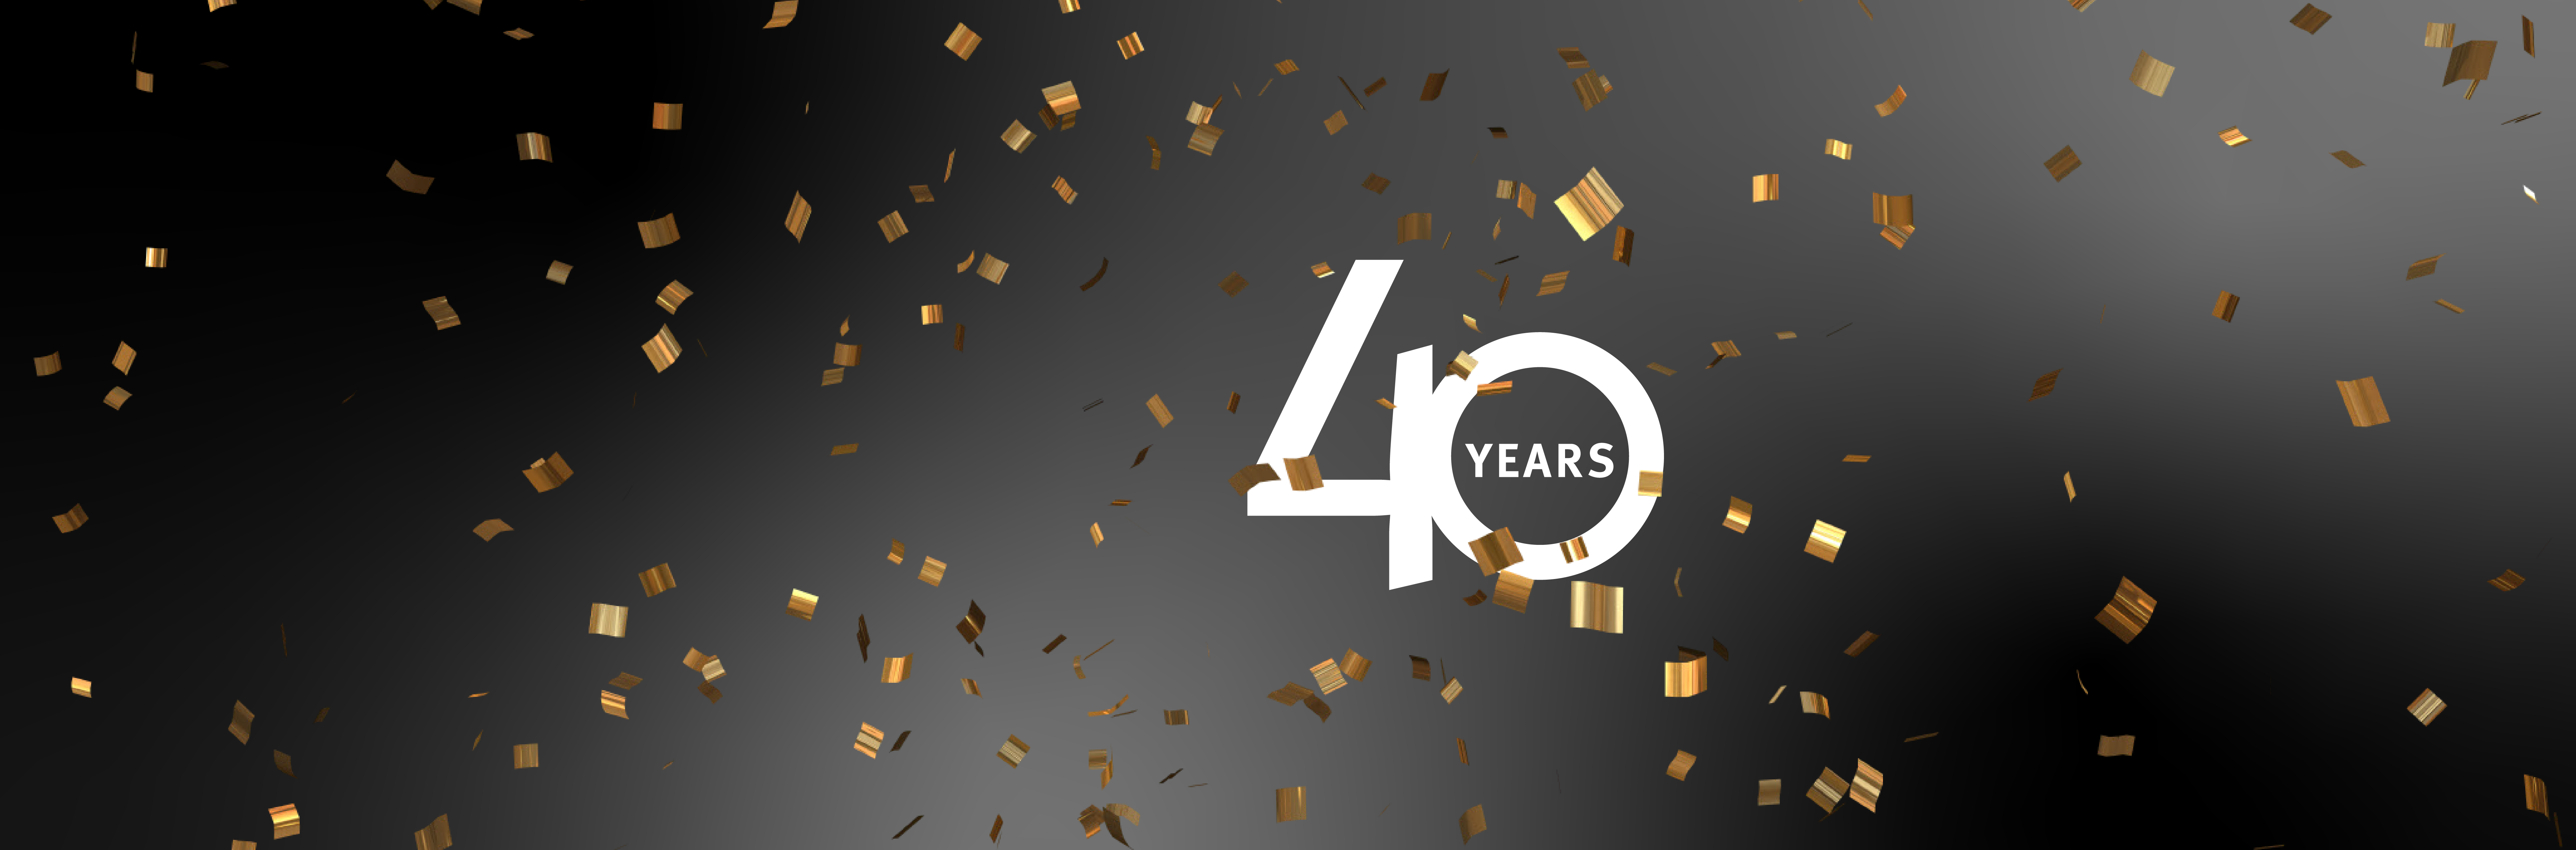 Oxford Global Resources is celebrating 40 years.